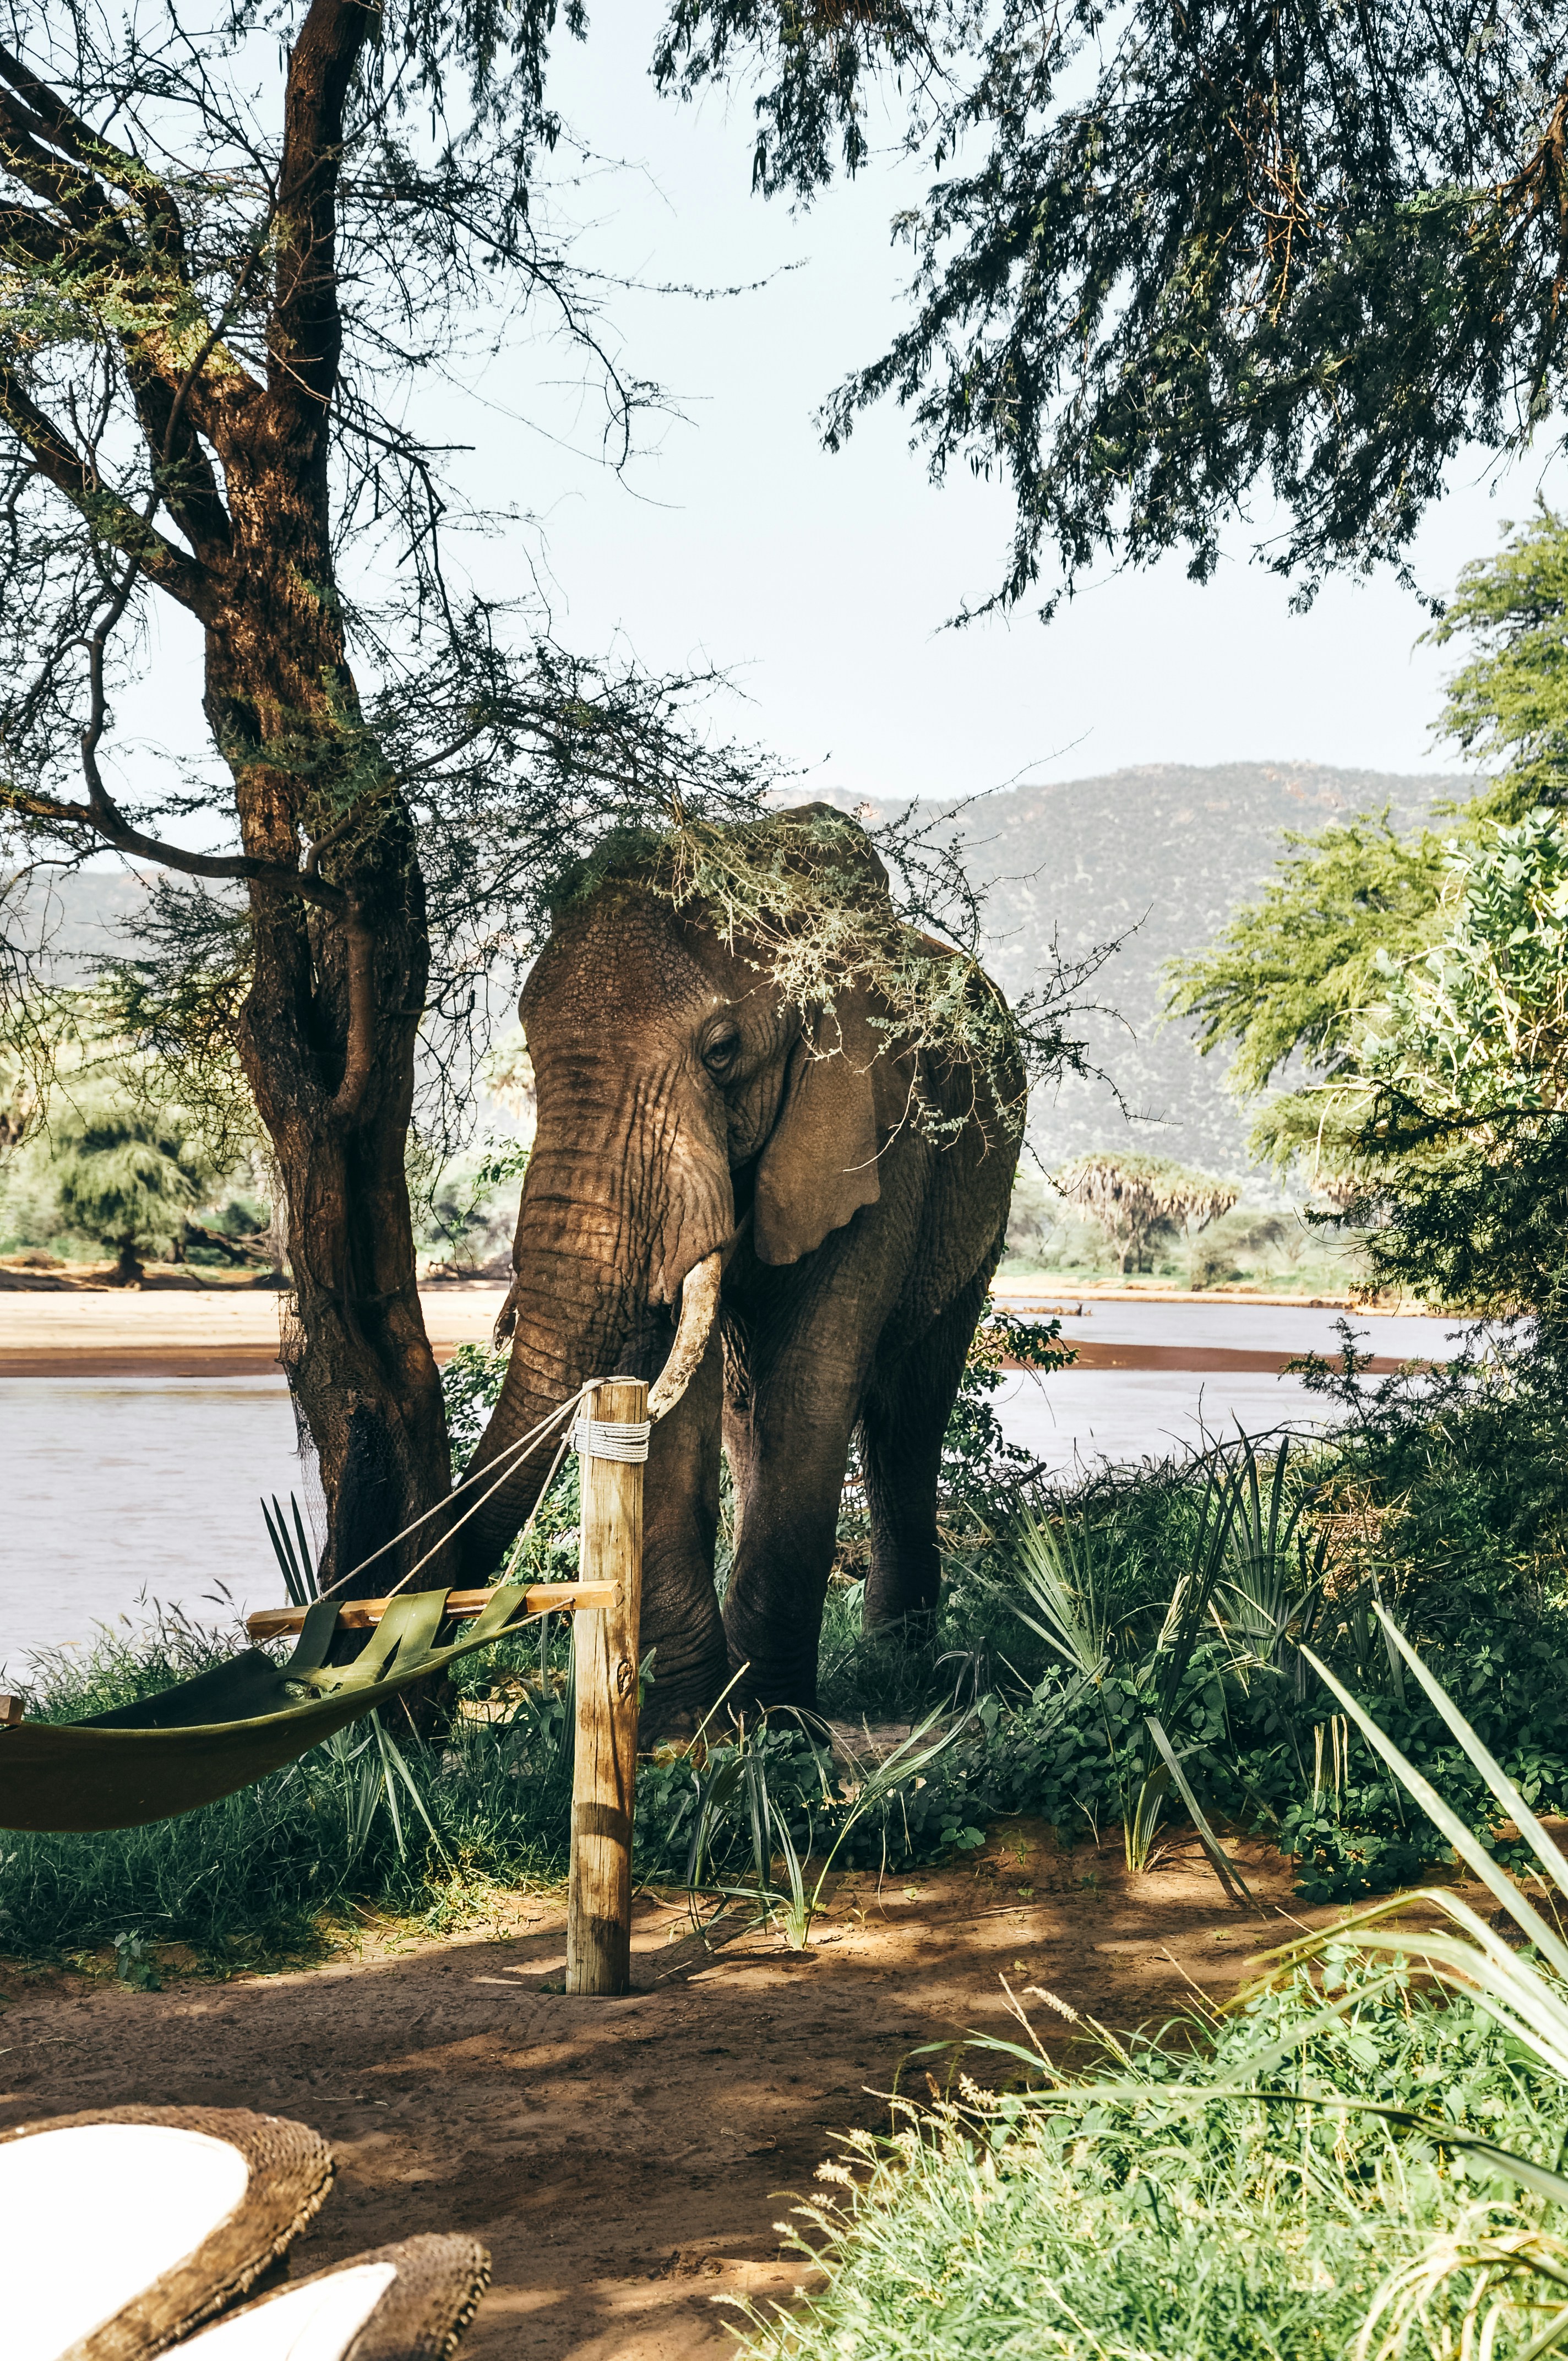 brown elephant standing beside tree near body of water during daytime